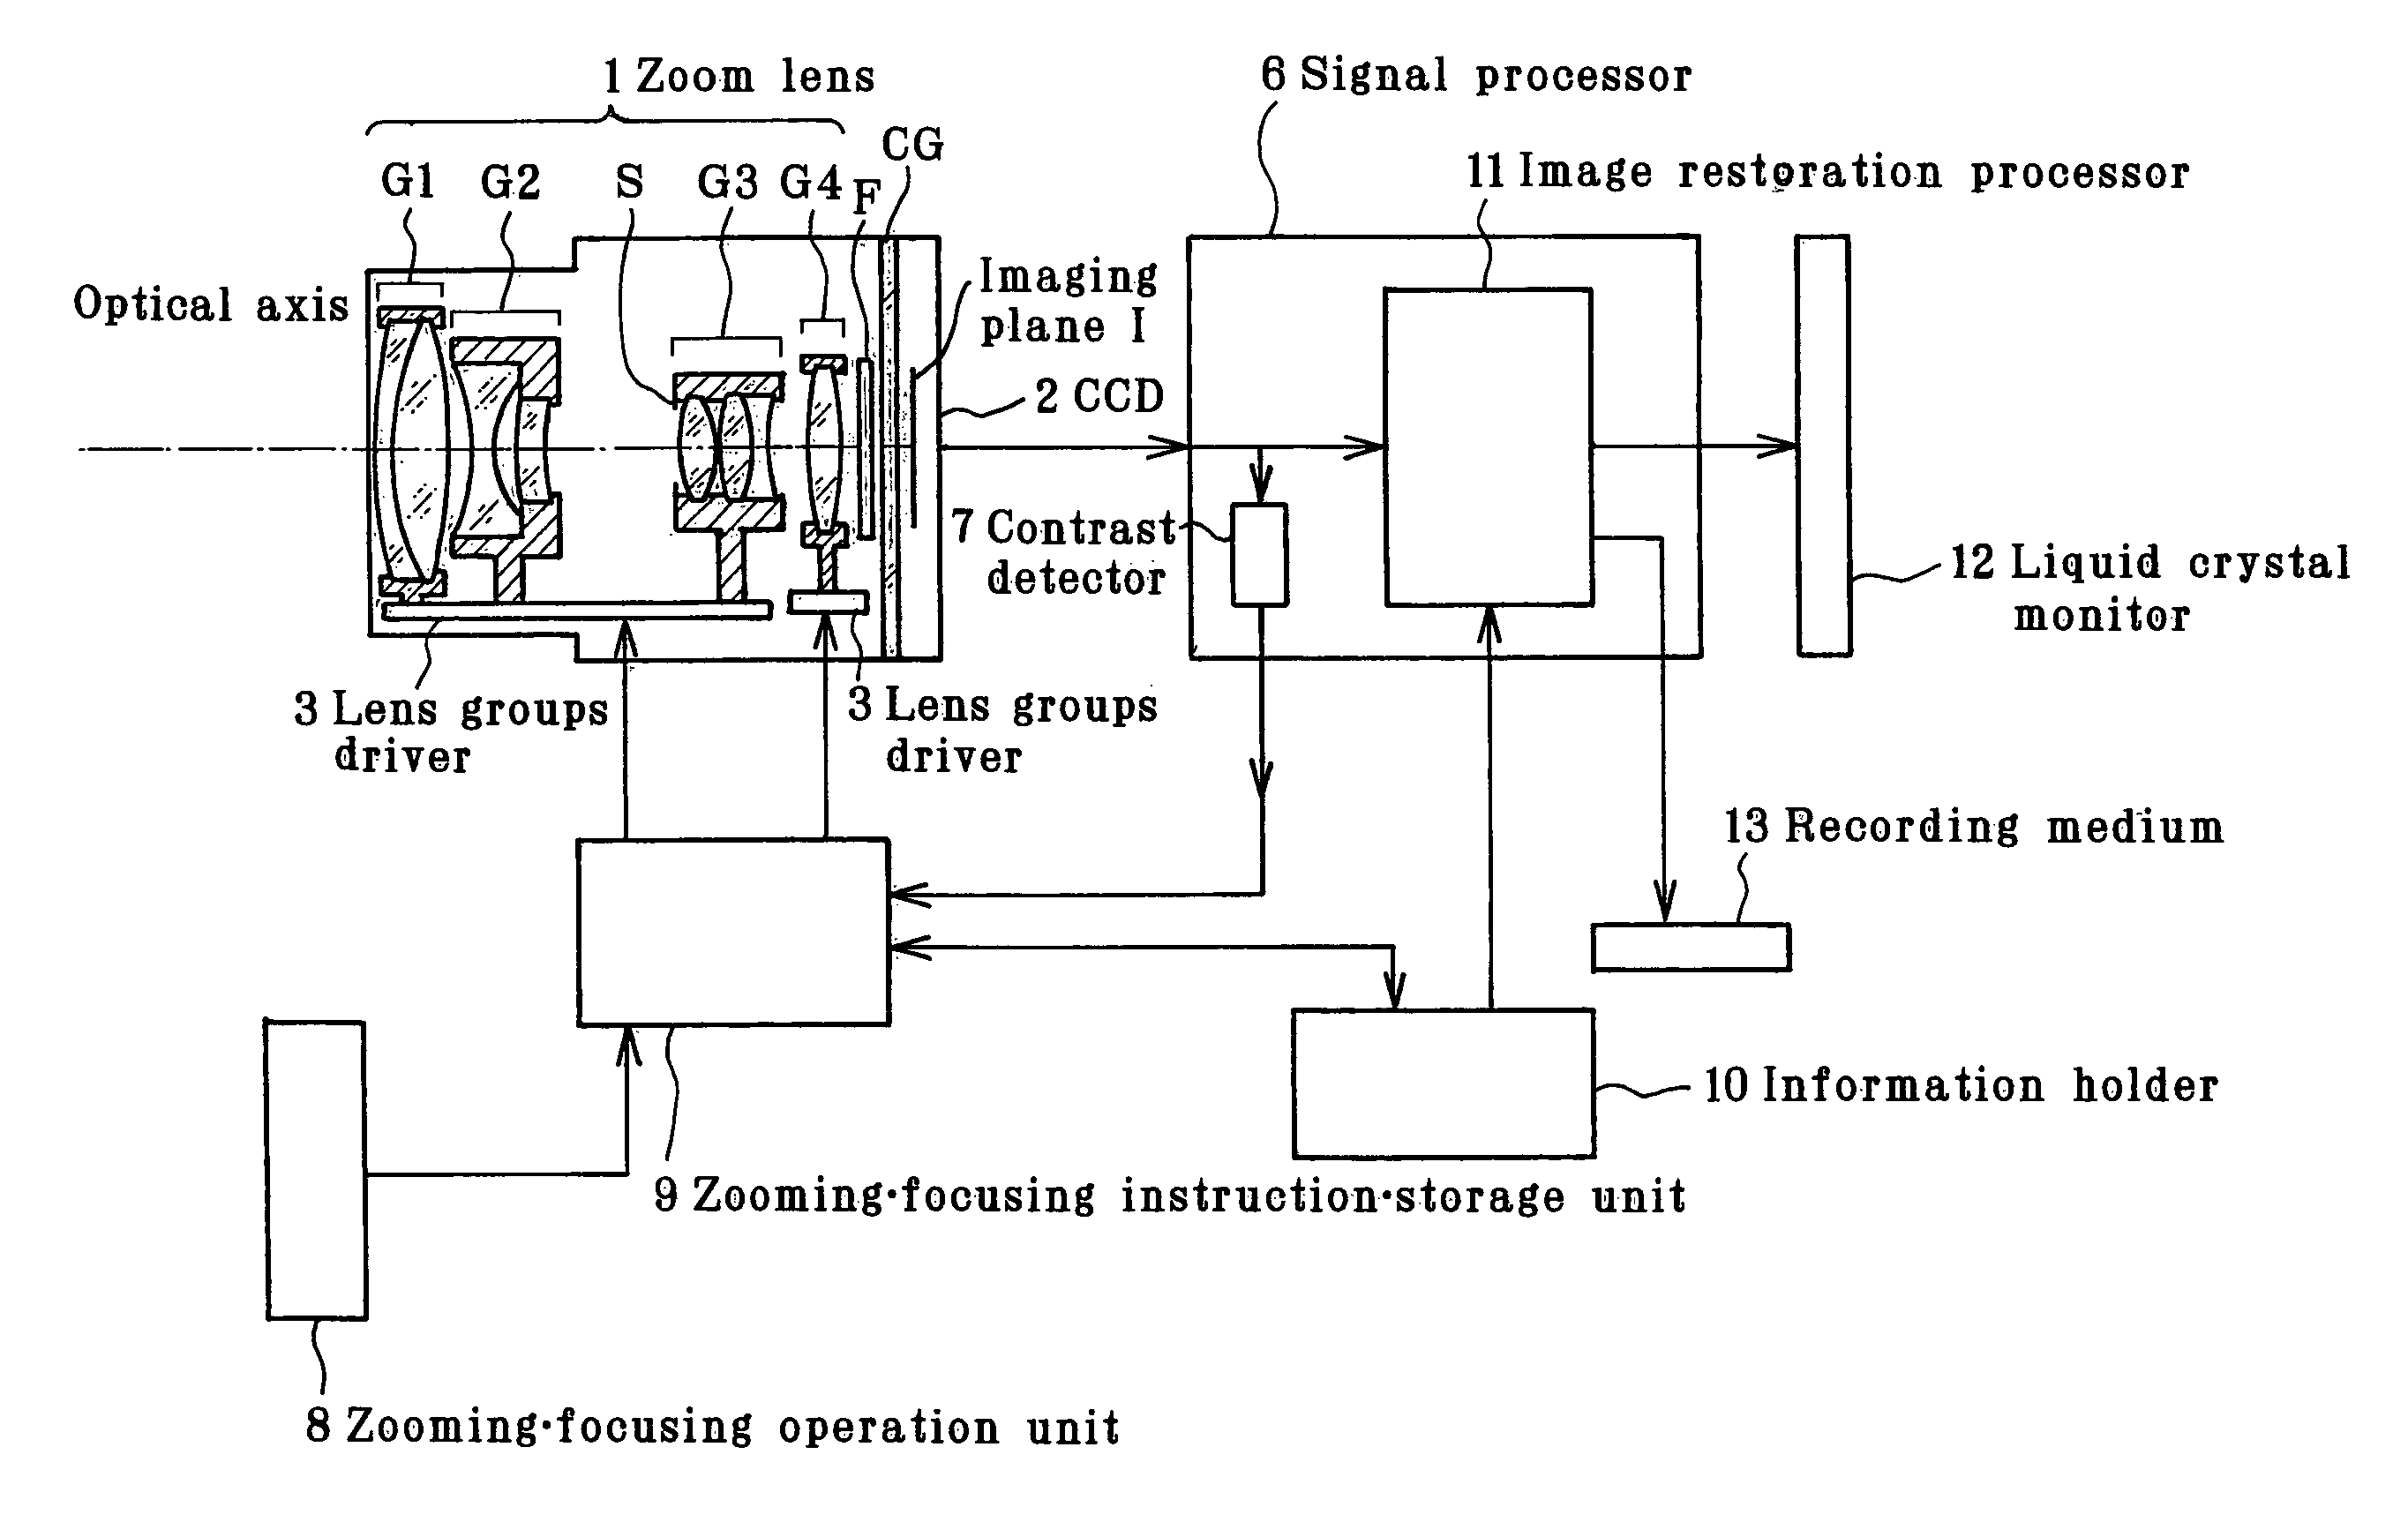 Imaging apparatus adapted to implement electrical image restoration processing